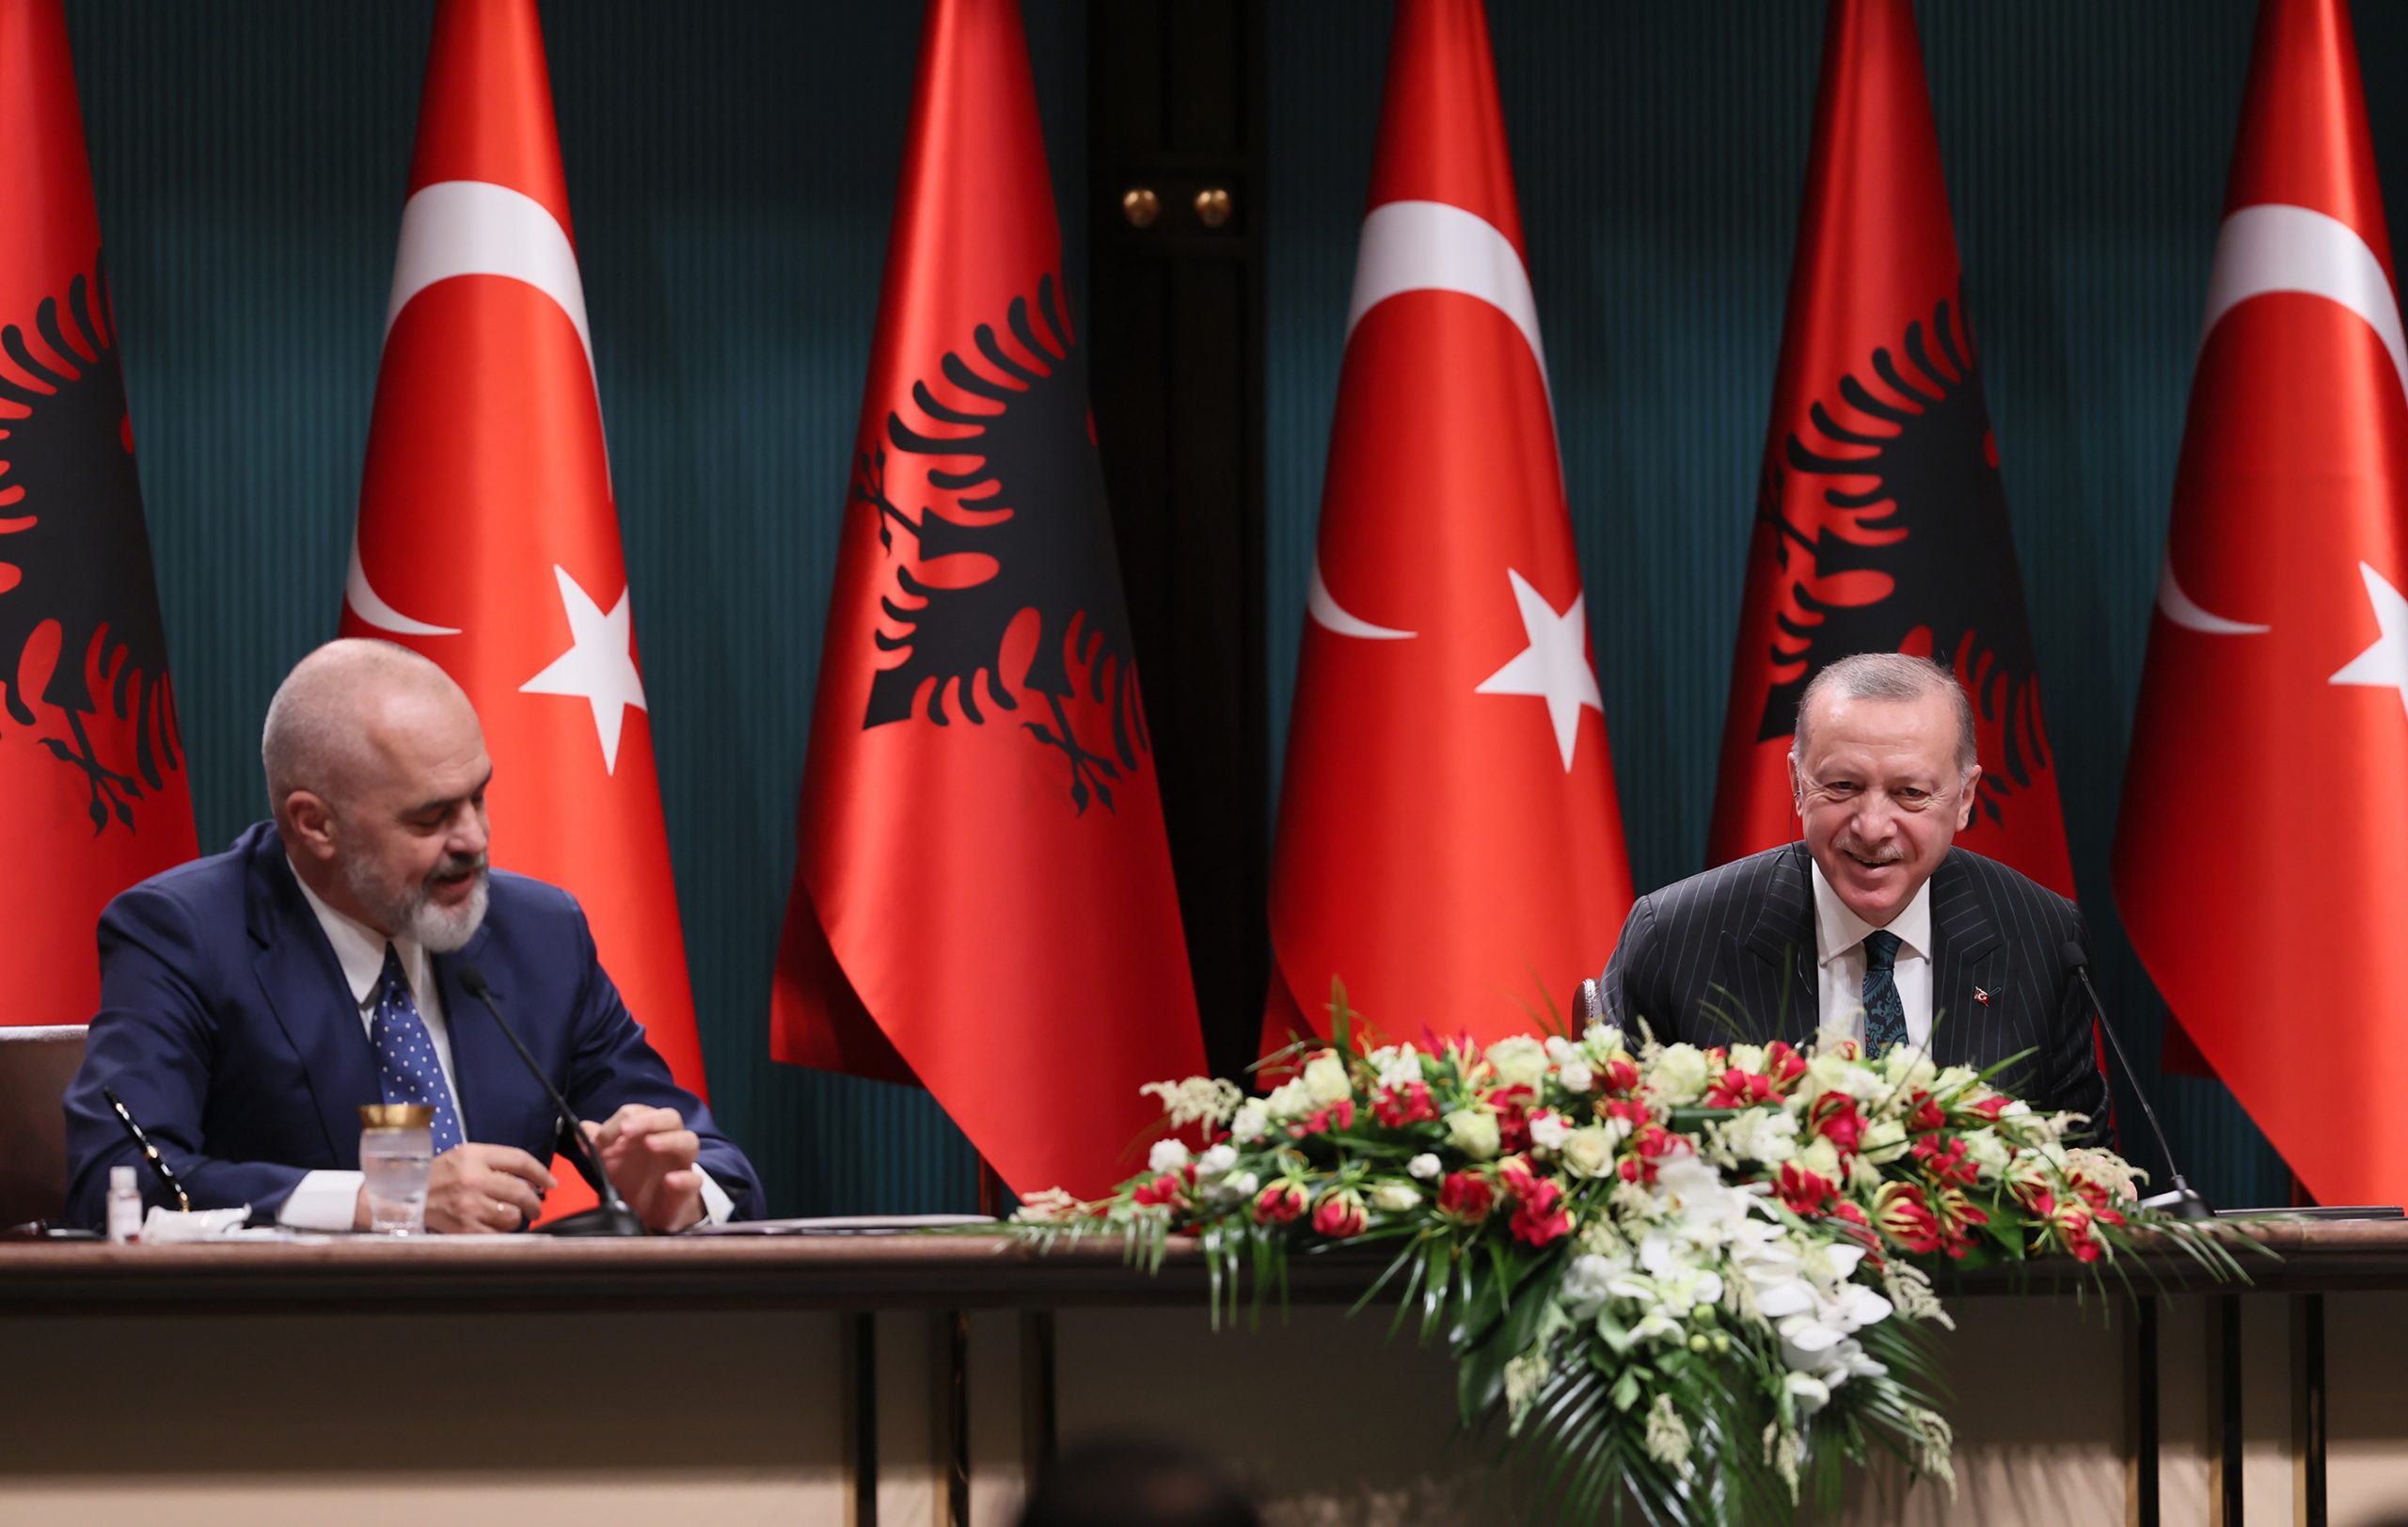 Erdogan to Sign Seven Agreements and Address Parliament during Visit to Tirana